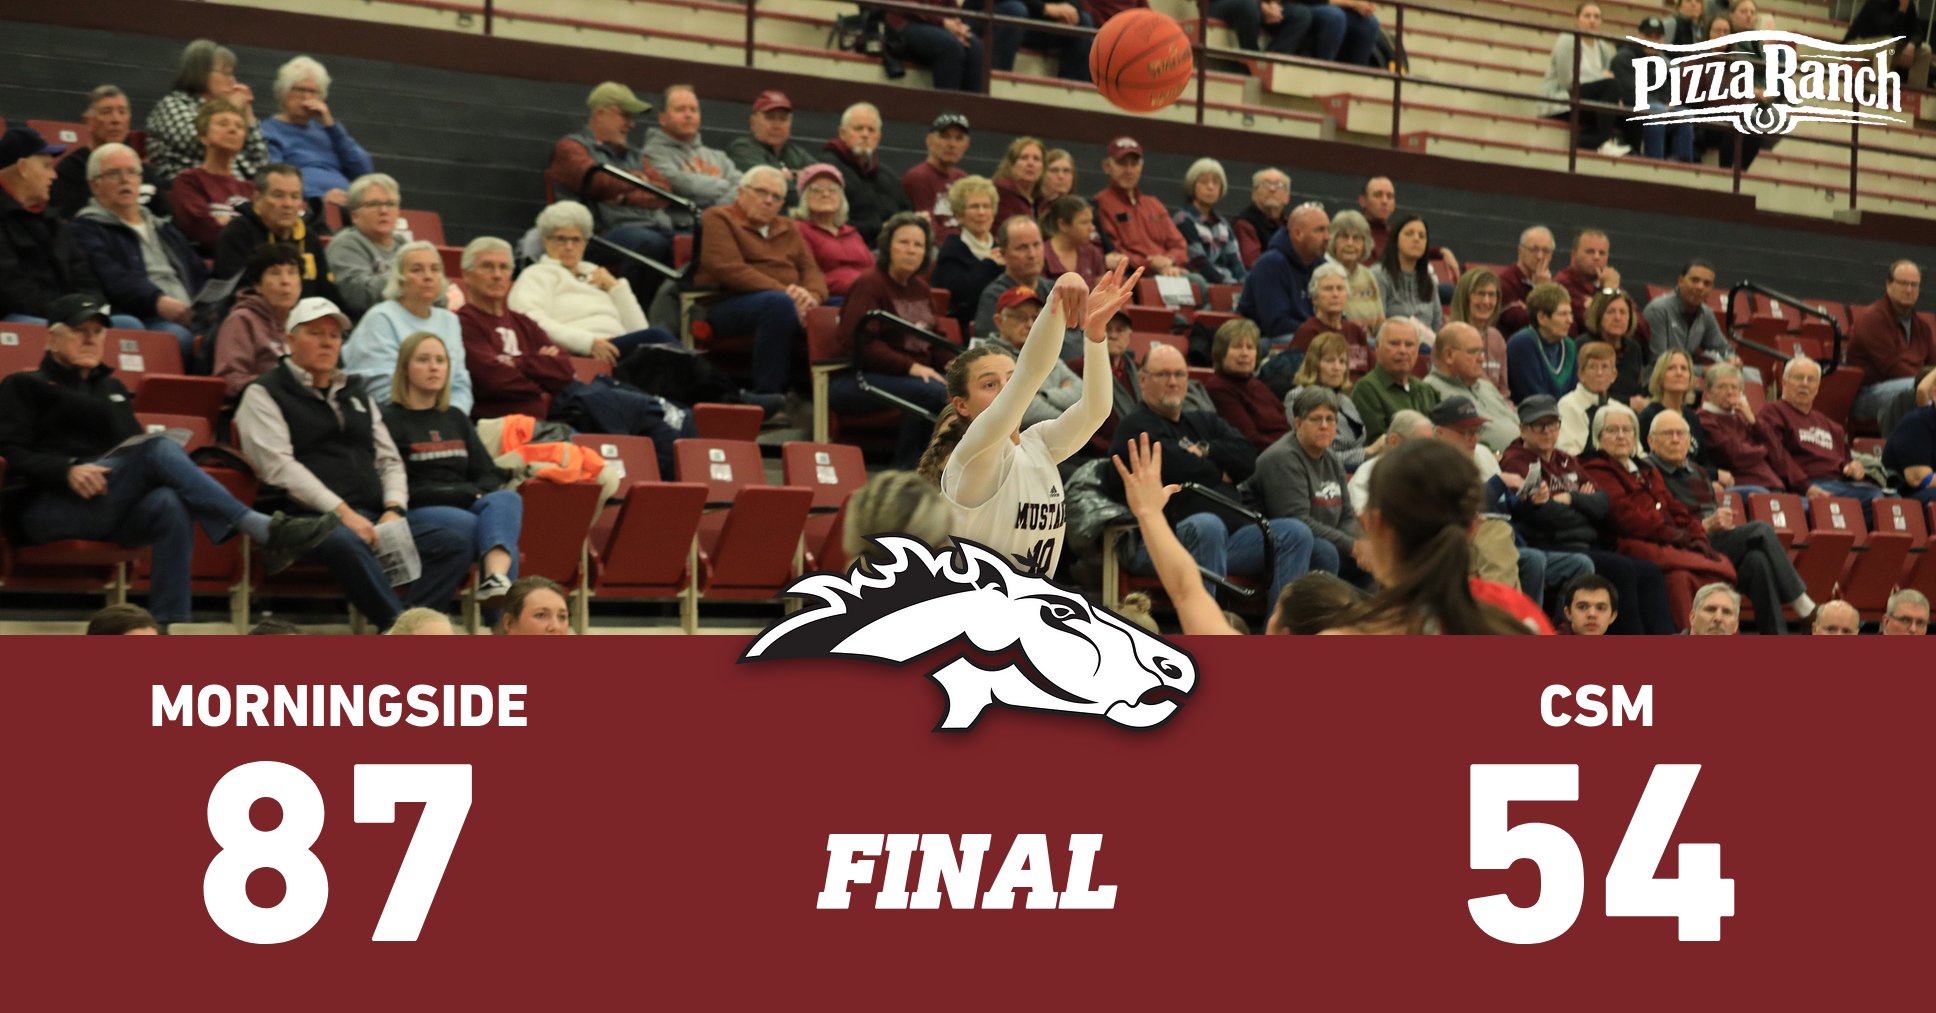 Morningside defeats College of Saint Mary 87-54